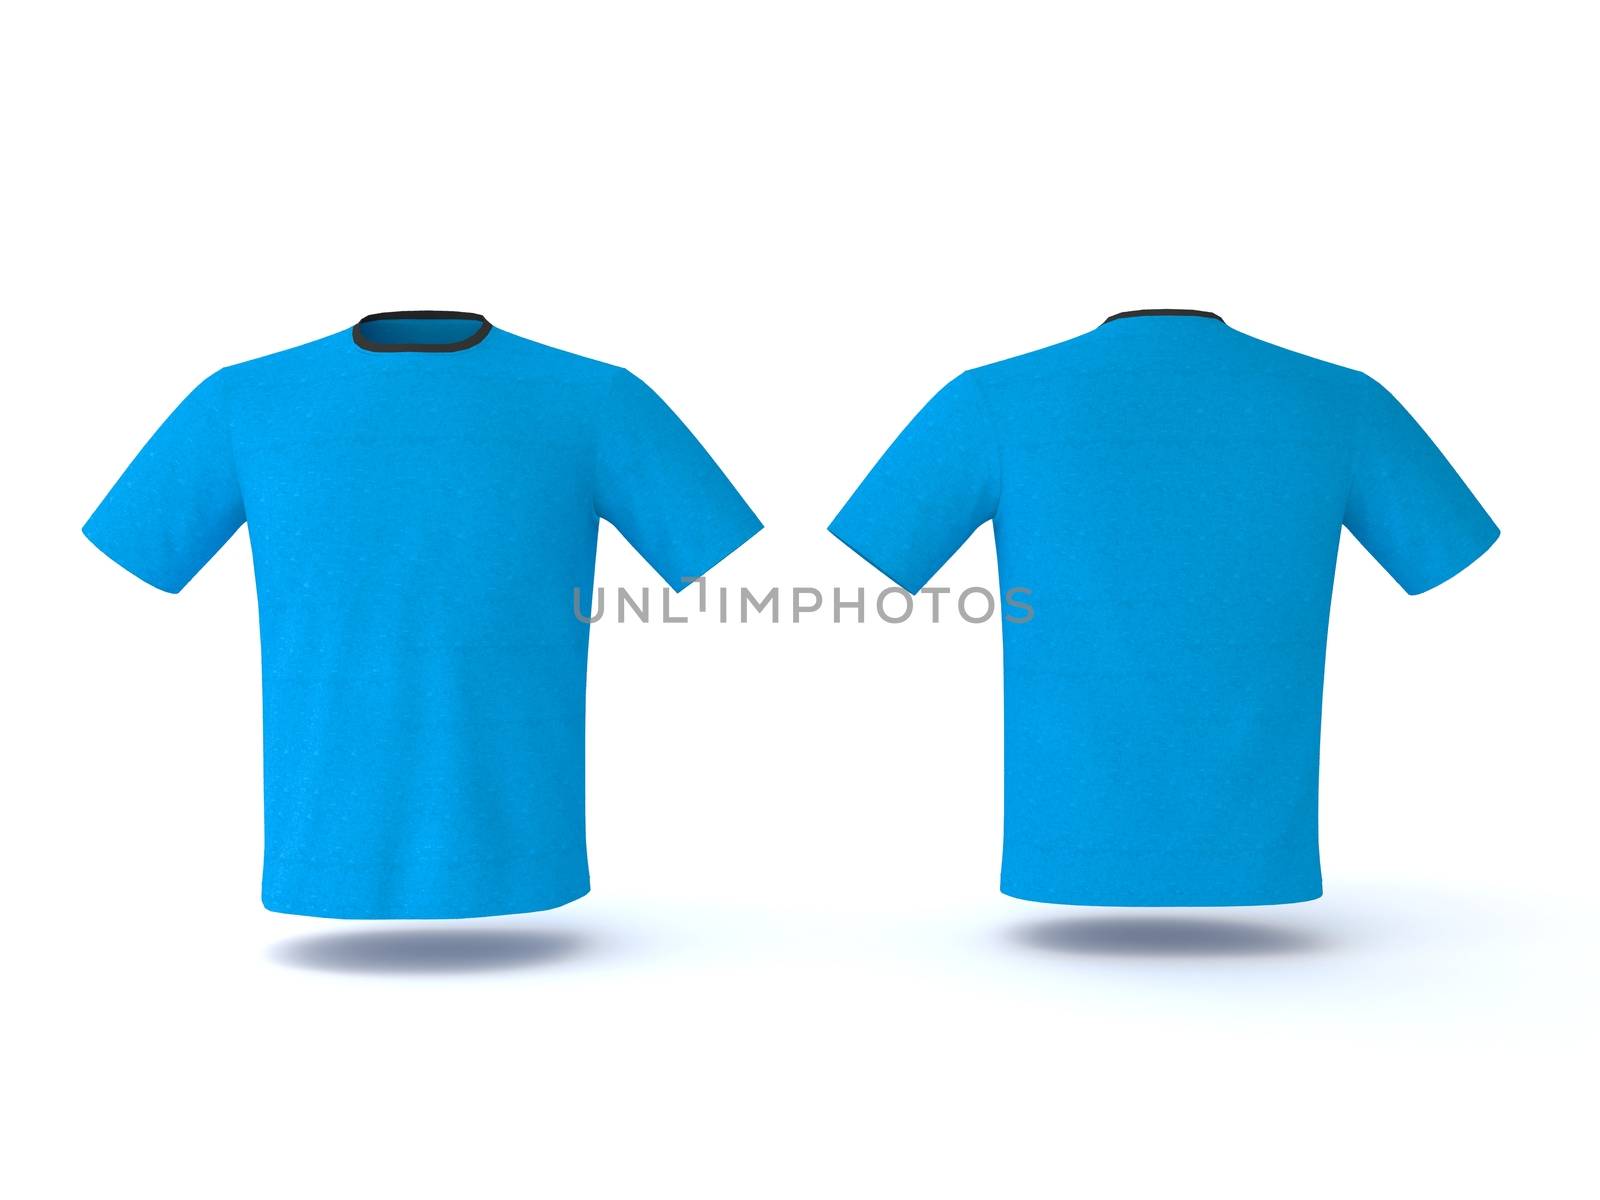 Blue T-shirt template, isolated on background. Men's realistic T-shirt mockup 3d render.